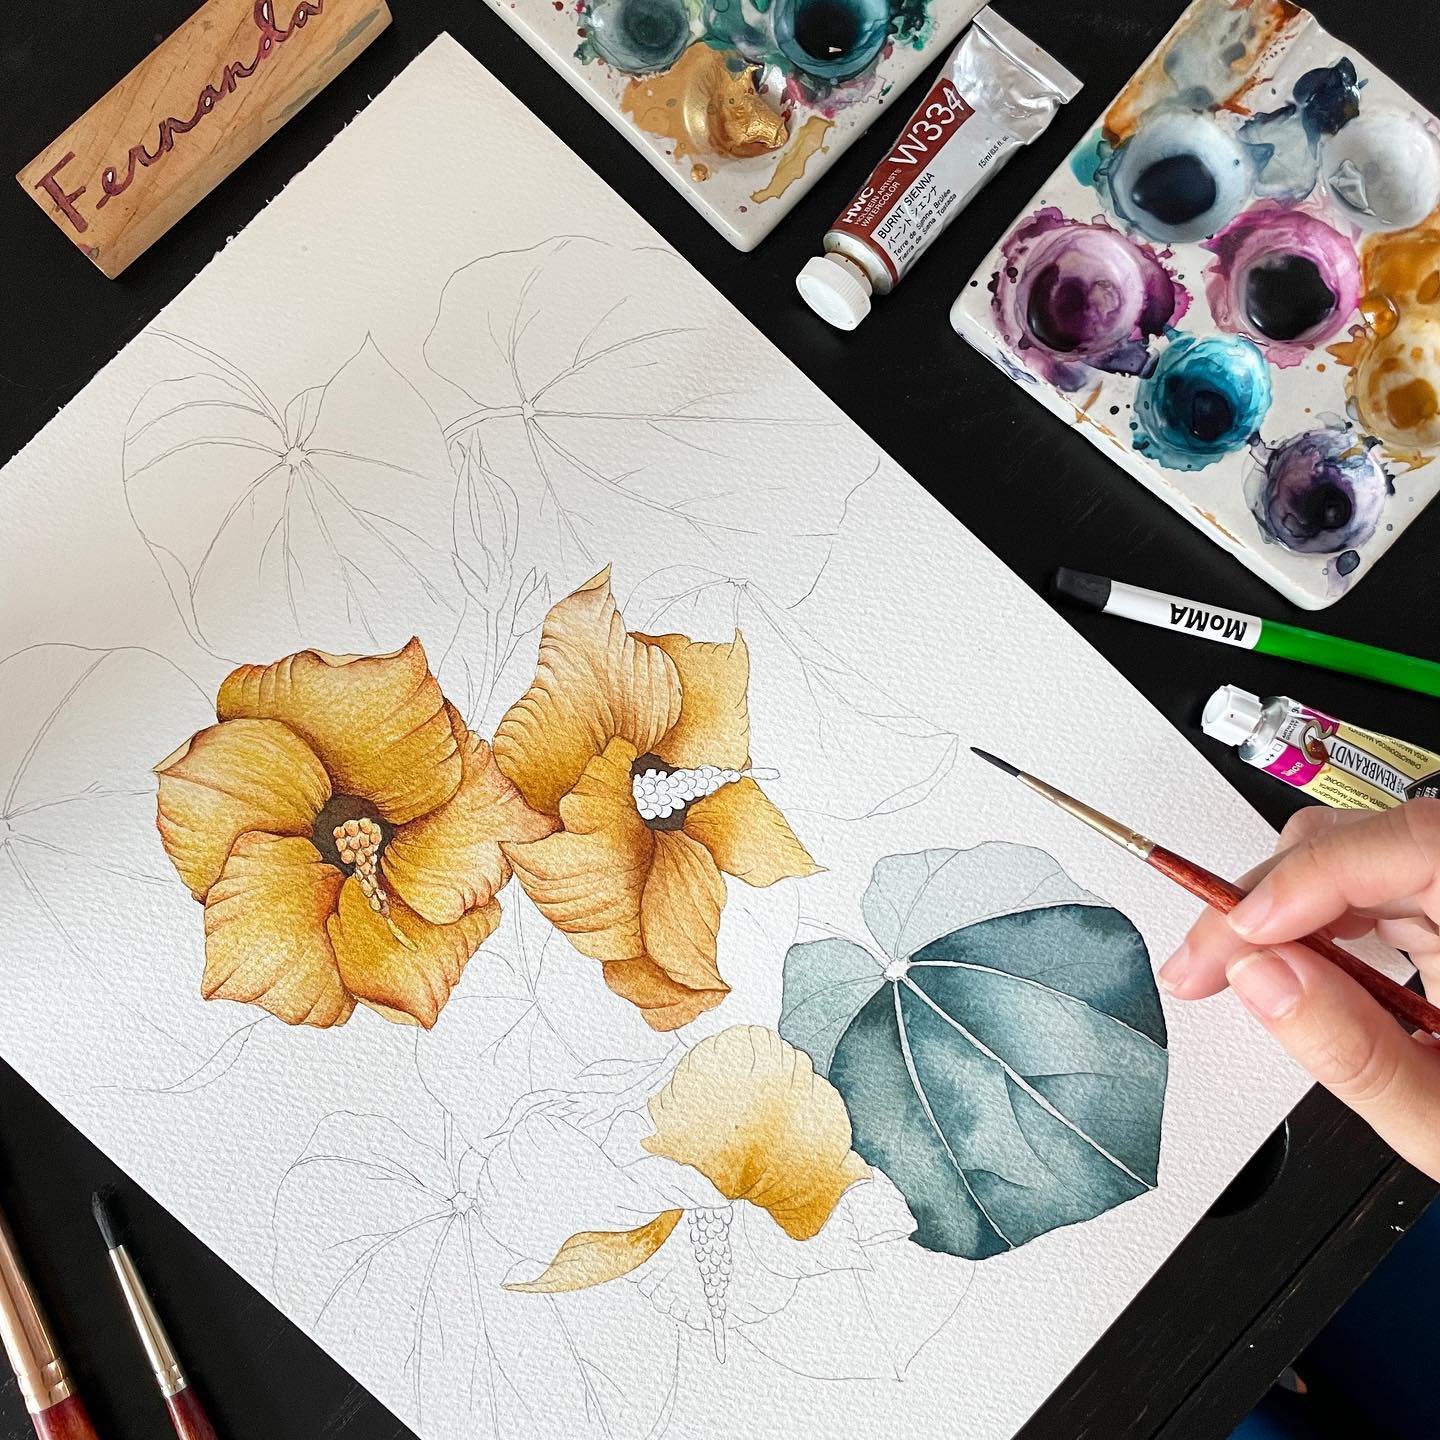 hibiscus watercolor painting